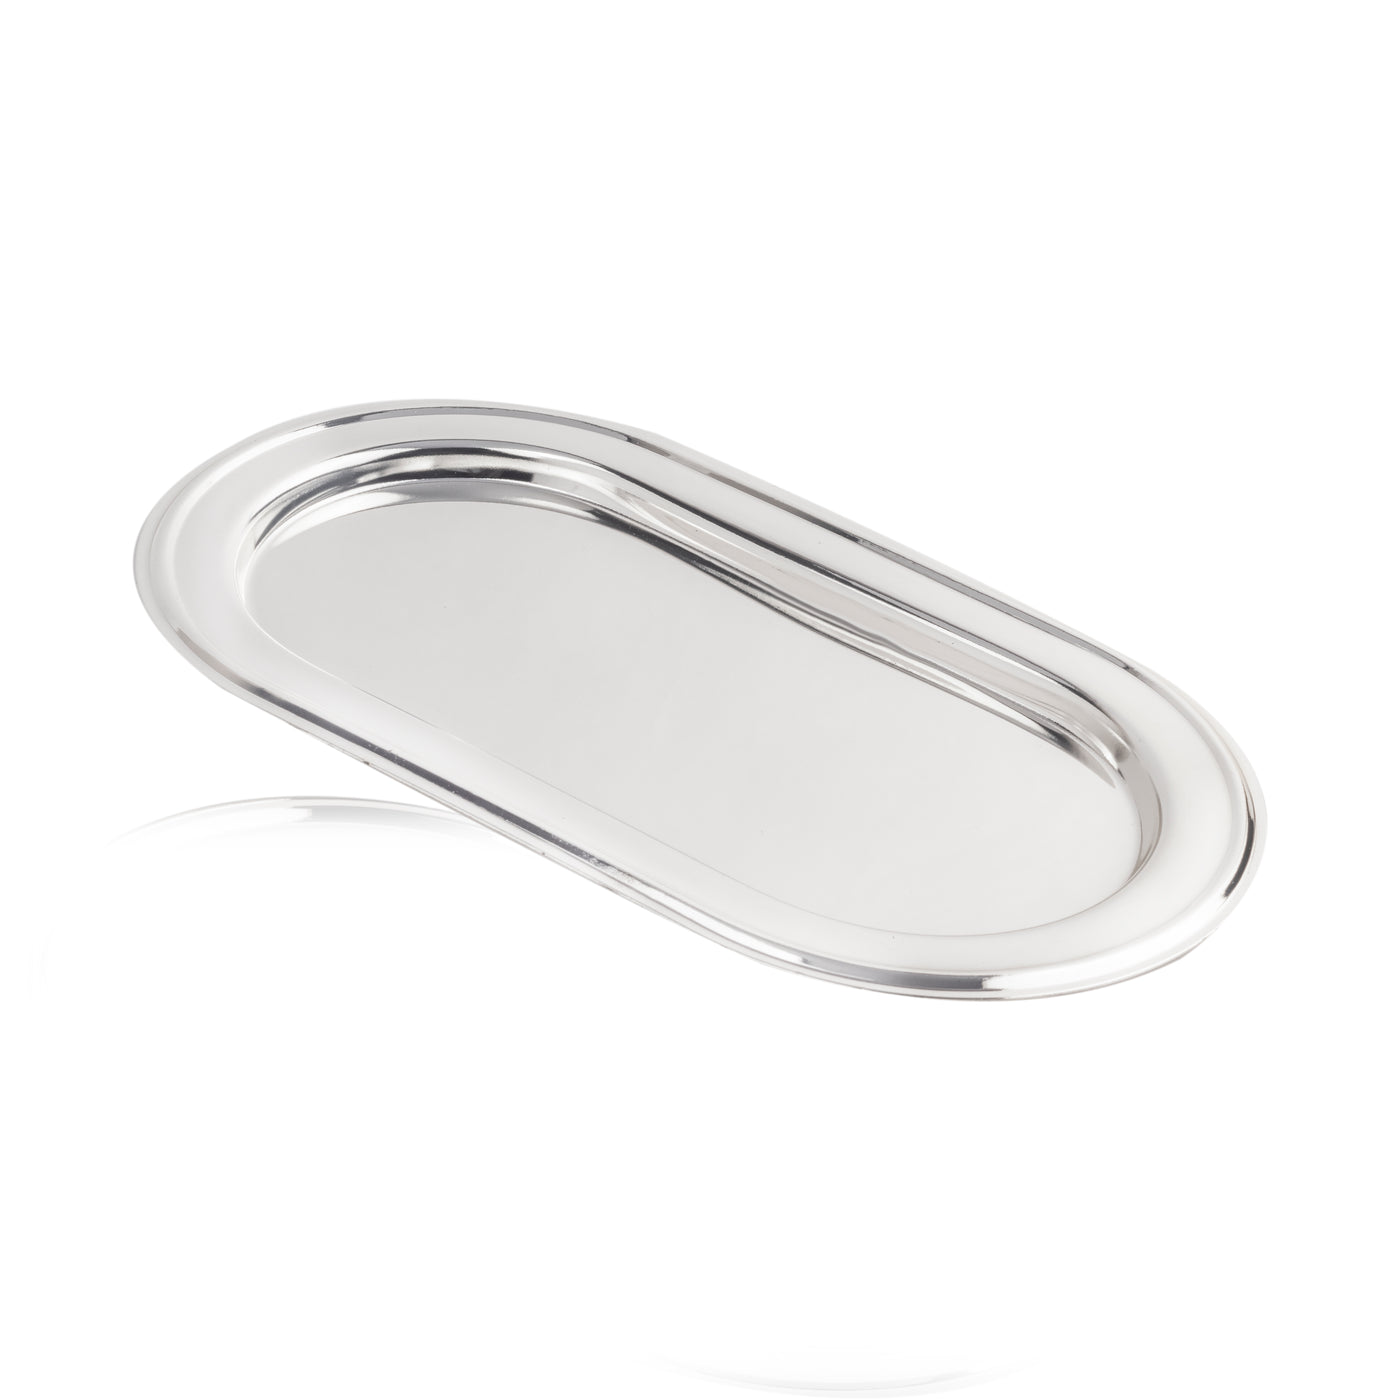 Silver Plated Flat Tray